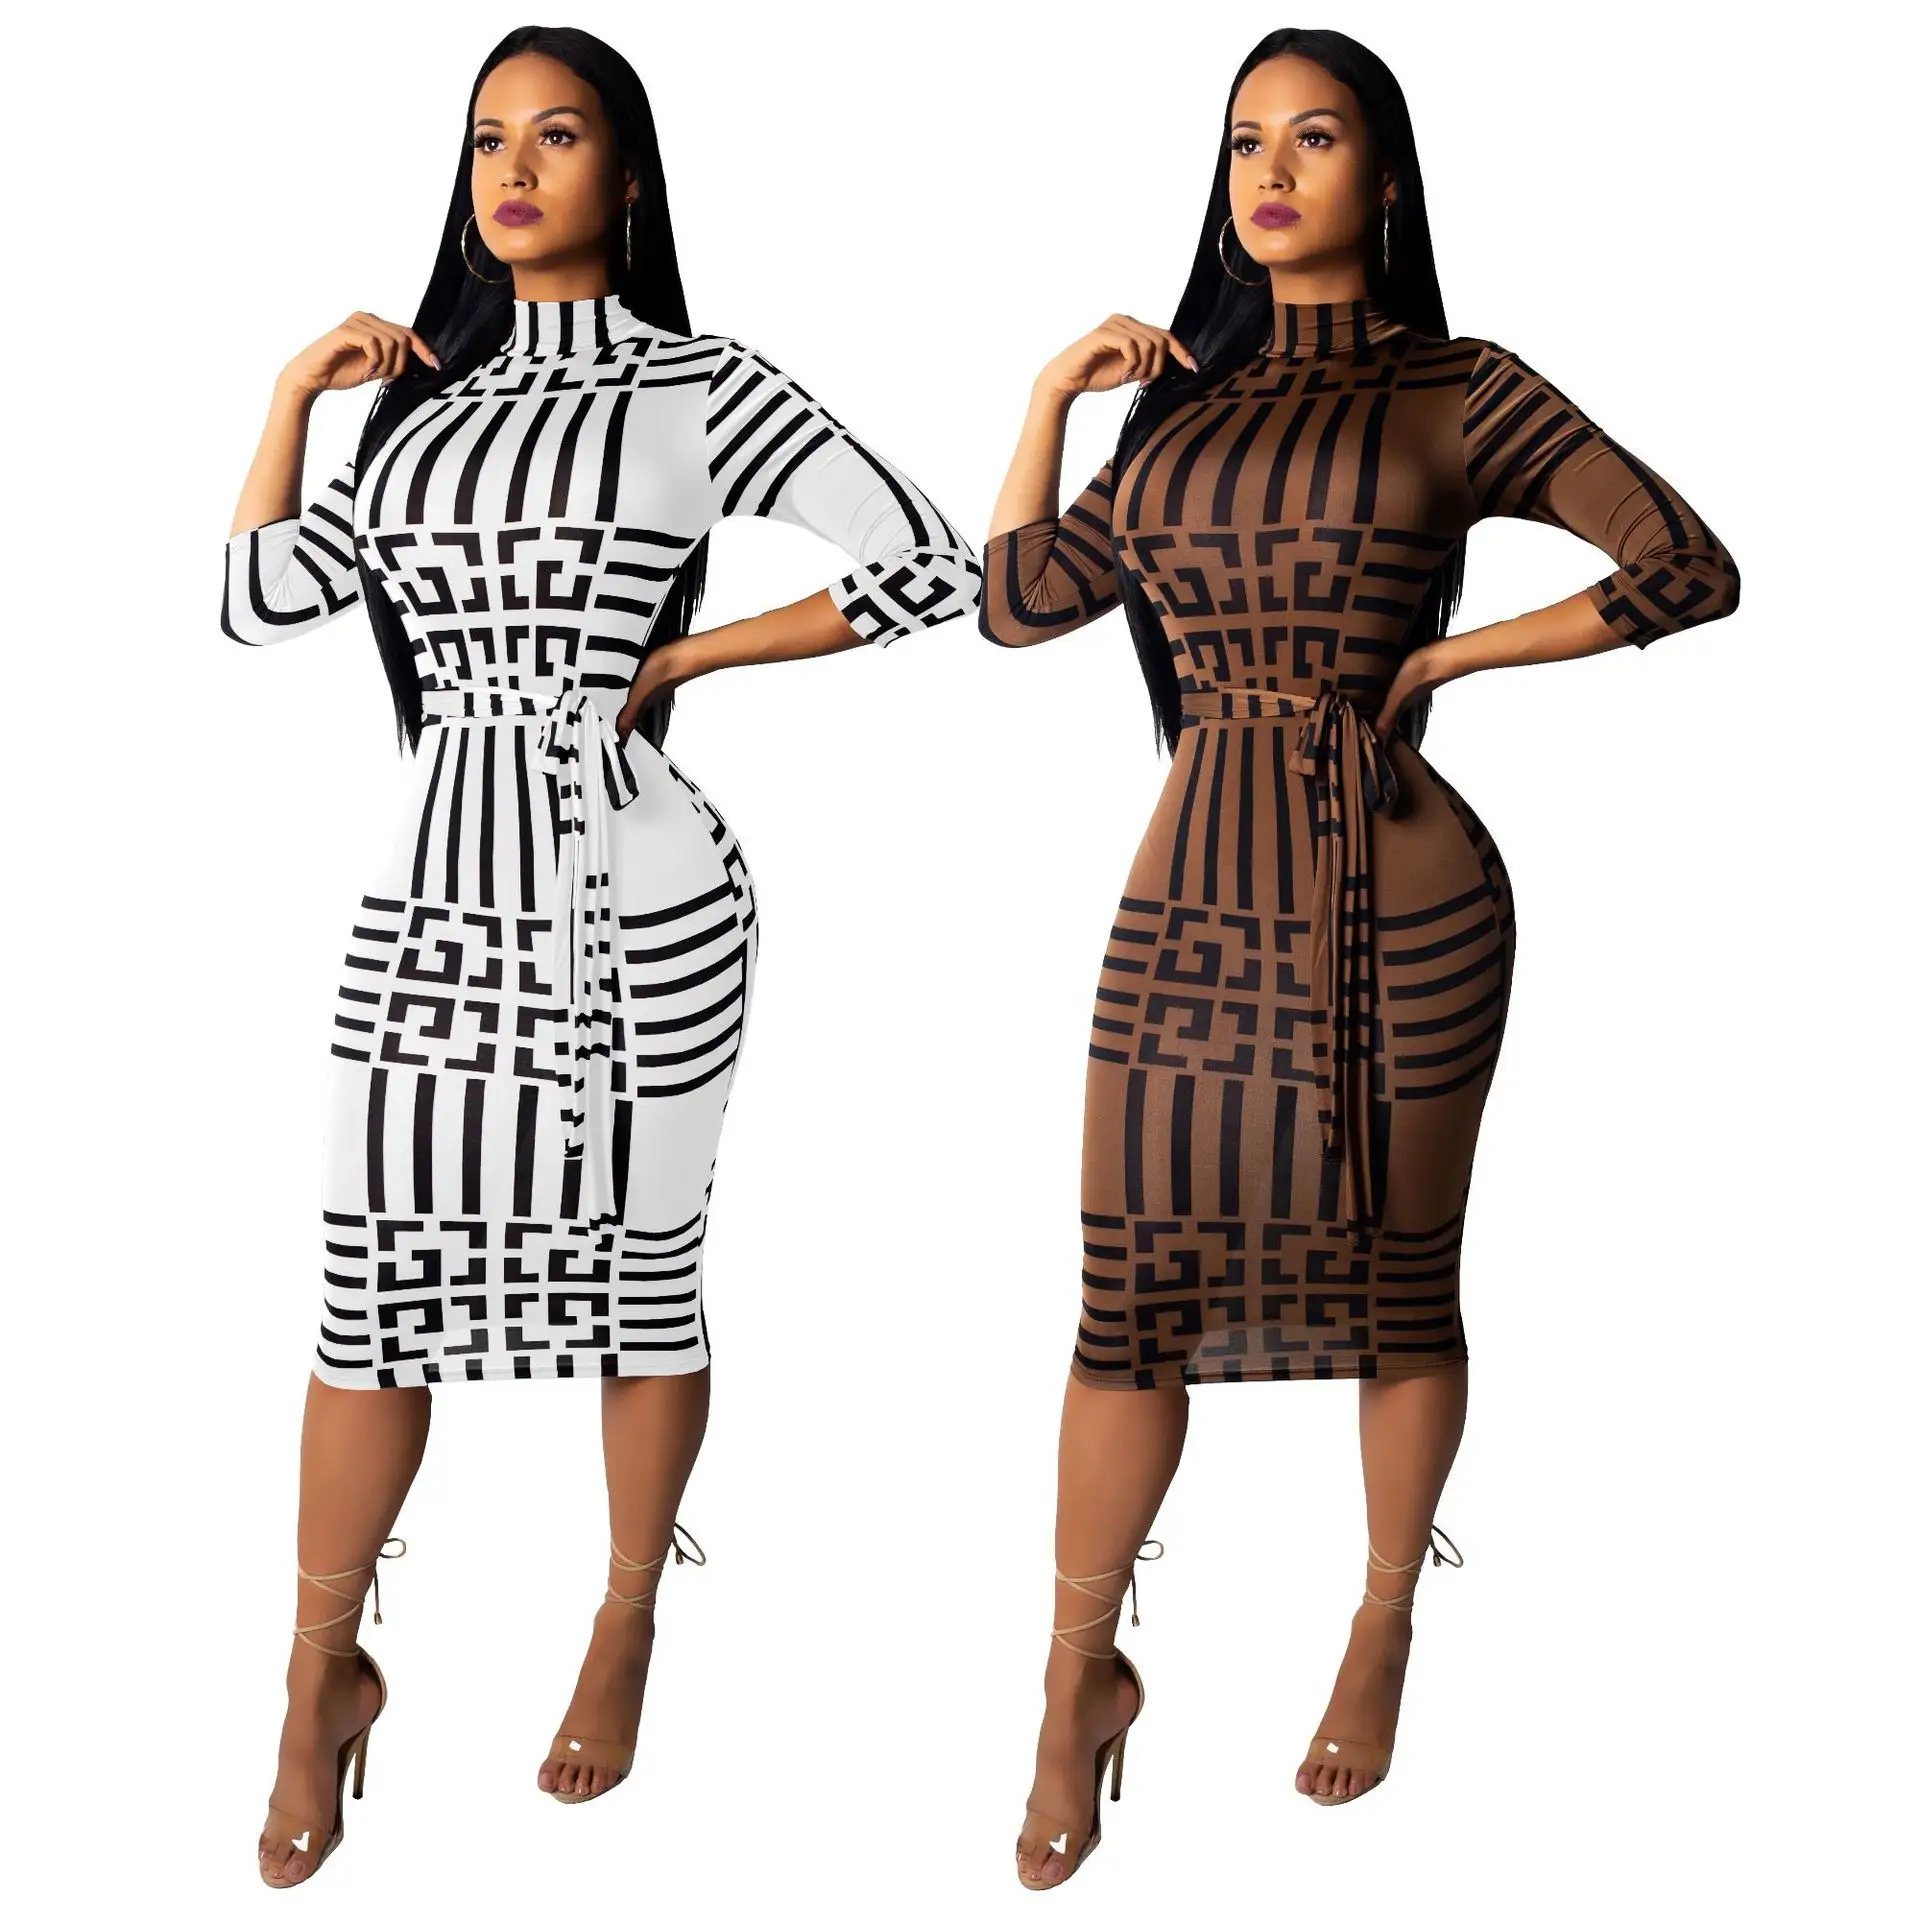 HOT Ladies 2023 Fall Half Sleeve Printed Dress Allure Couture New Fashion Outfits for Hot Women